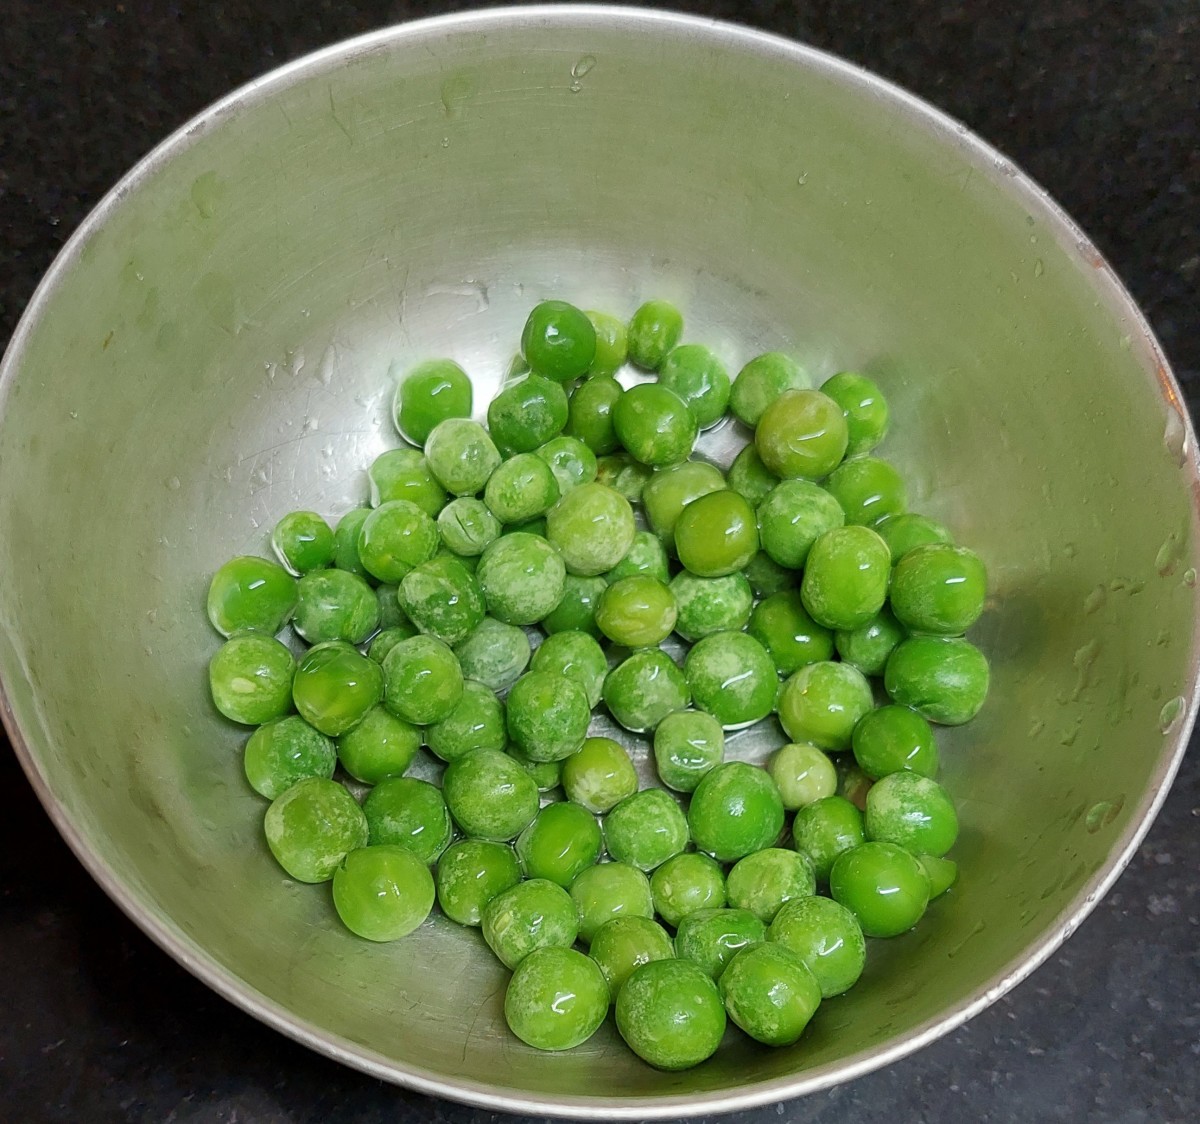 Wash 1/2 cup peas (fresh or frozen) and set aside.